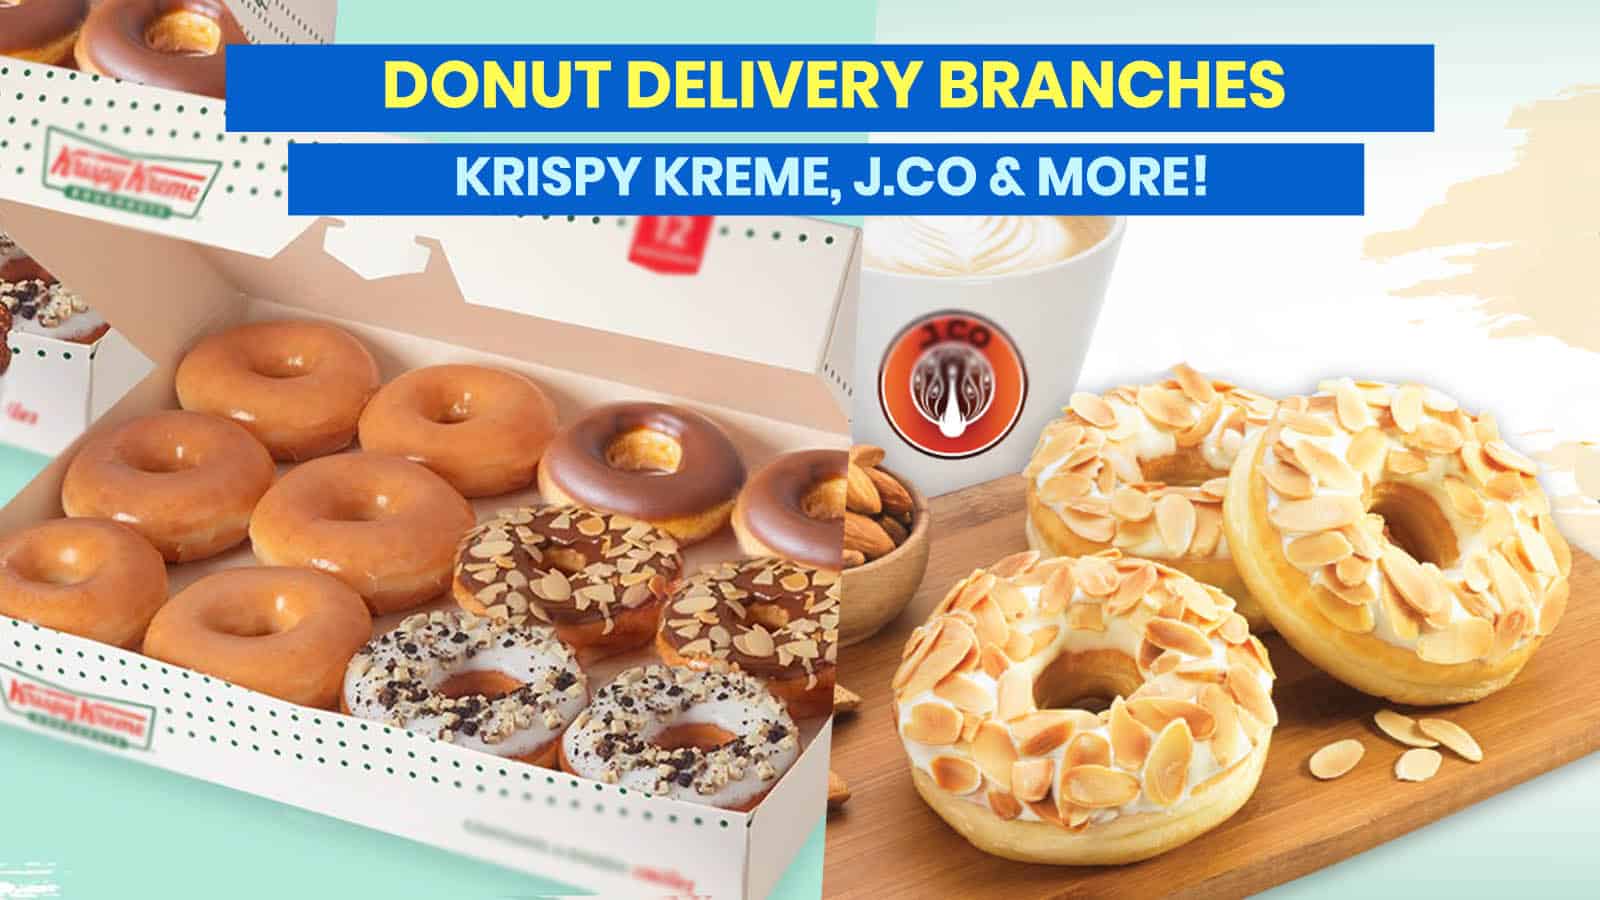 DONUT DELIVERY: Open Branches of Krispy Kreme, J.Co, Dunkin’ & More!